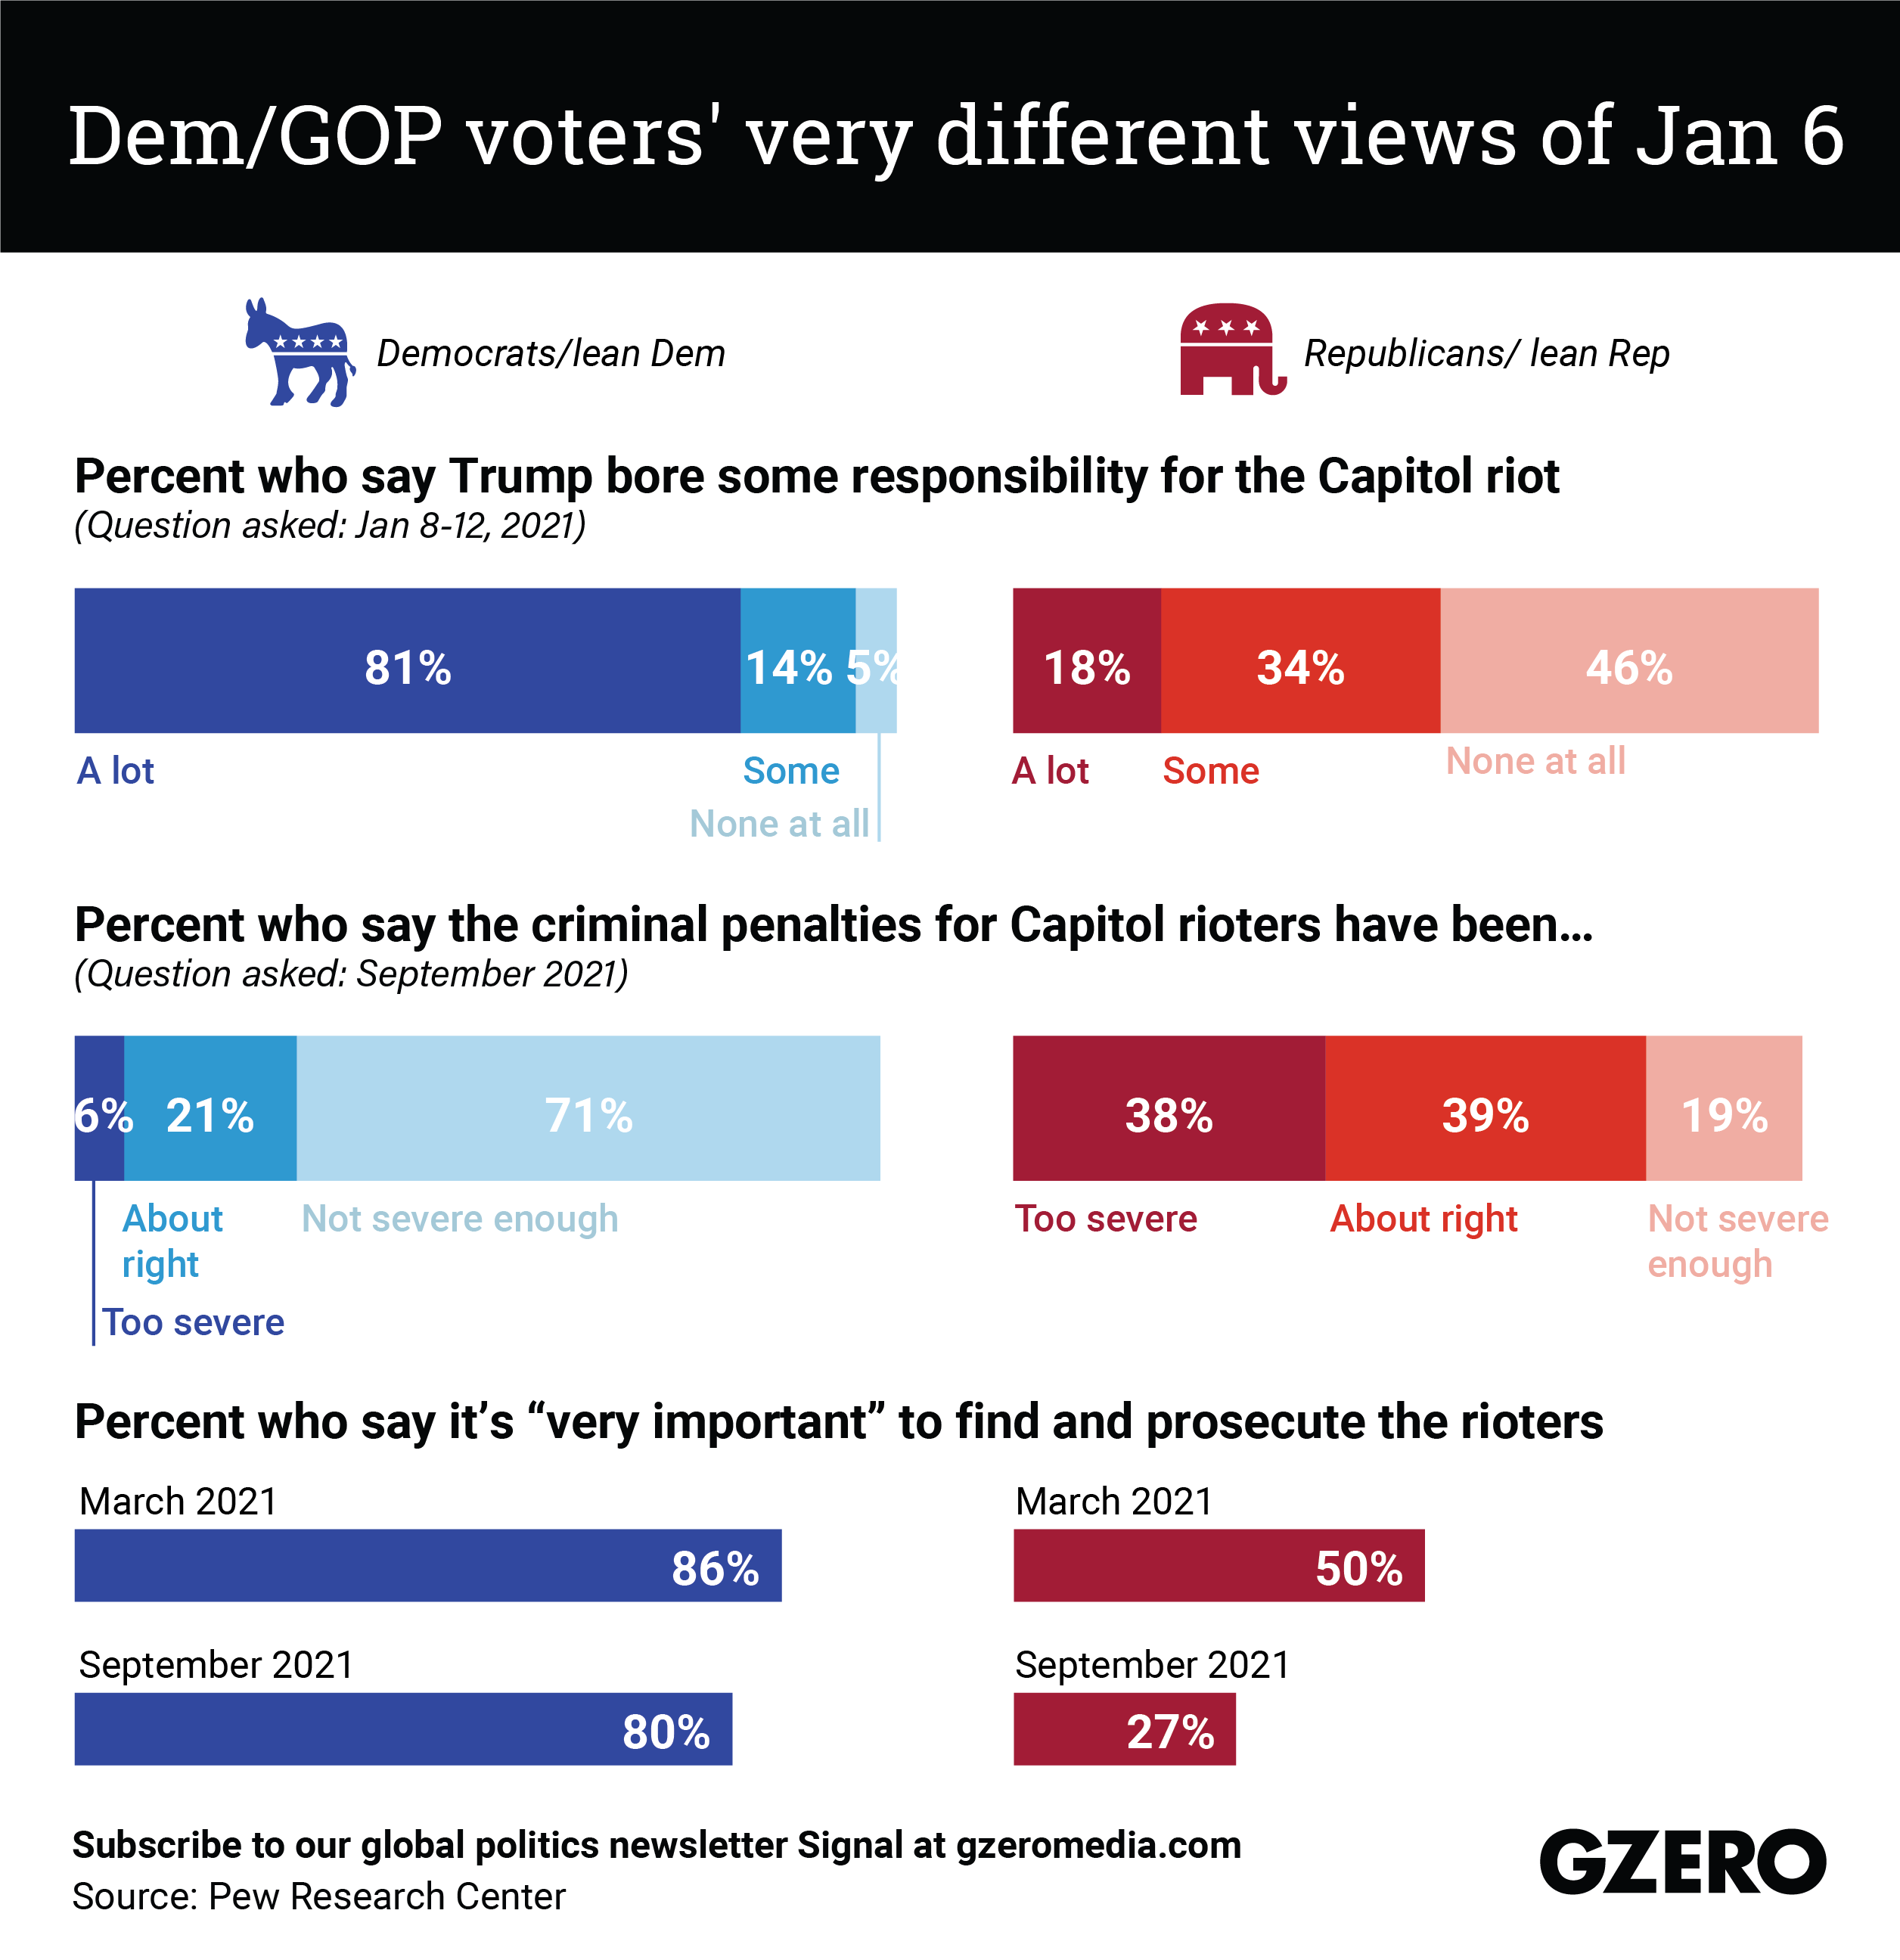 The Graphic Truth: Dem/GOP voters' very different views of Jan 6